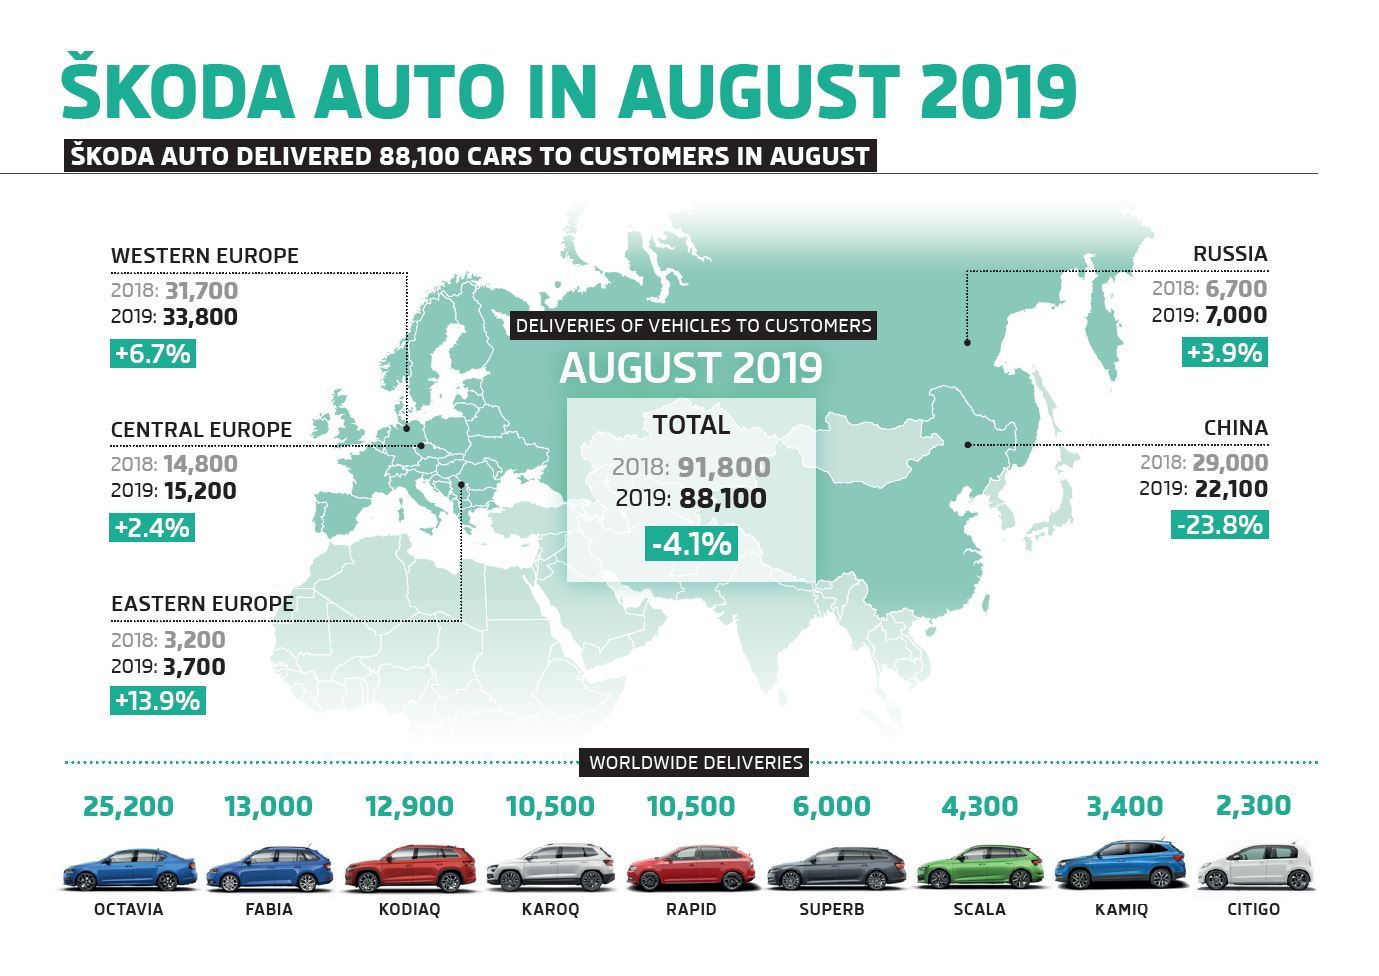 ŠKODA recorded growth in Western (+6.7%), Central (+2.4%) and Eastern Europe (+13.9%) and Russia (+3.9%).